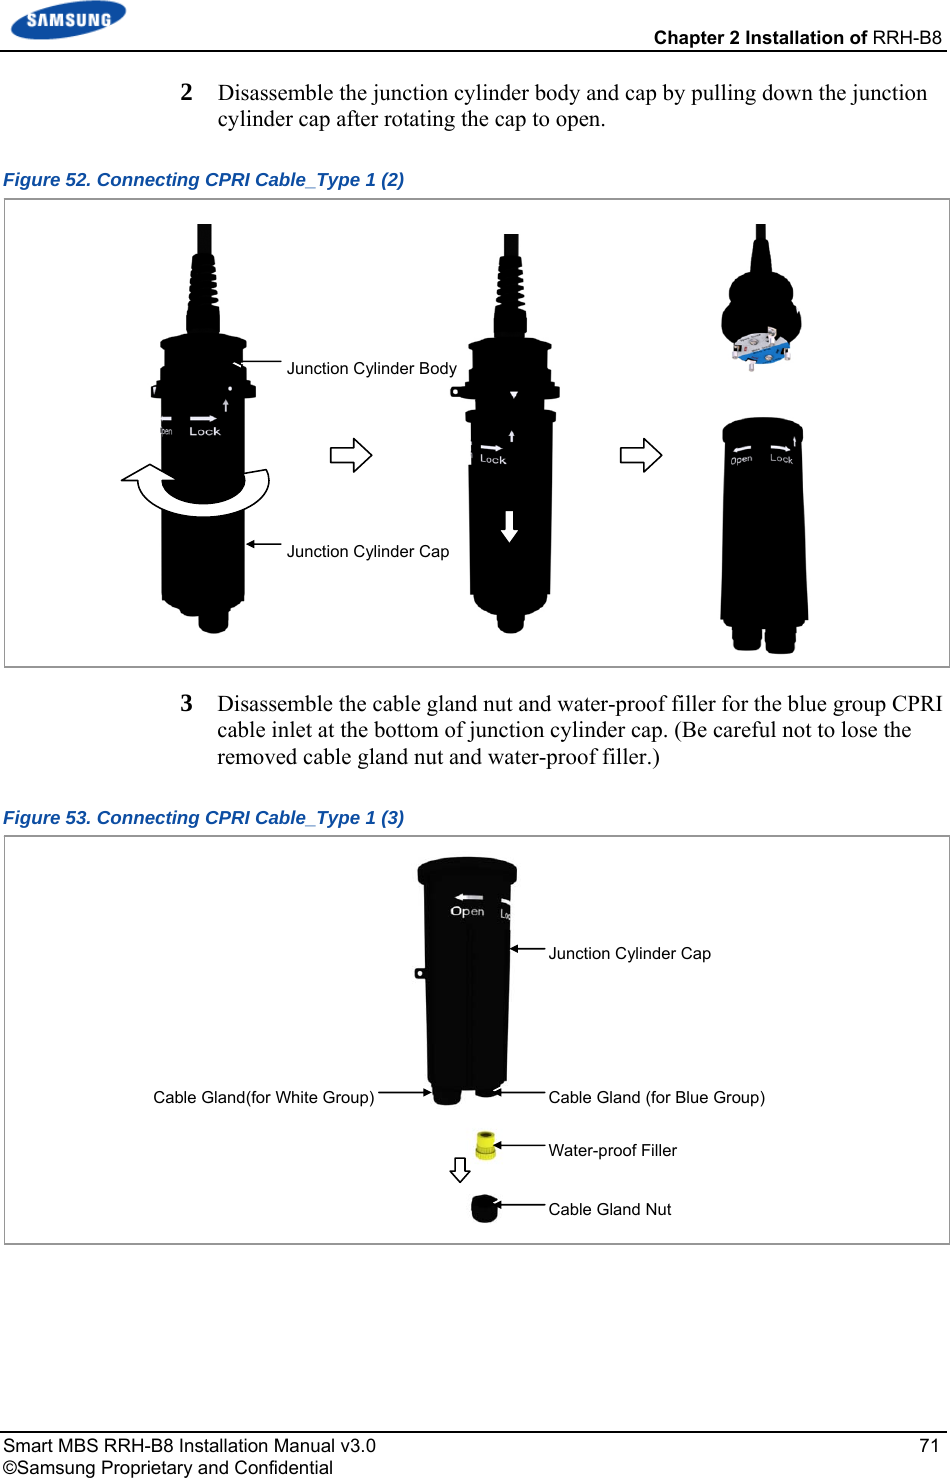  Chapter 2 Installation of RRH-B8 Smart MBS RRH-B8 Installation Manual v3.0   71 ©Samsung Proprietary and Confidential 2  Disassemble the junction cylinder body and cap by pulling down the junction cylinder cap after rotating the cap to open. Figure 52. Connecting CPRI Cable_Type 1 (2)  3  Disassemble the cable gland nut and water-proof filler for the blue group CPRI cable inlet at the bottom of junction cylinder cap. (Be careful not to lose the removed cable gland nut and water-proof filler.) Figure 53. Connecting CPRI Cable_Type 1 (3)    Water-proof Filler Cable Gland Nut Junction Cylinder CapCable Gland (for Blue Group) Cable Gland(for White Group) Junction Cylinder CapJunction Cylinder Body